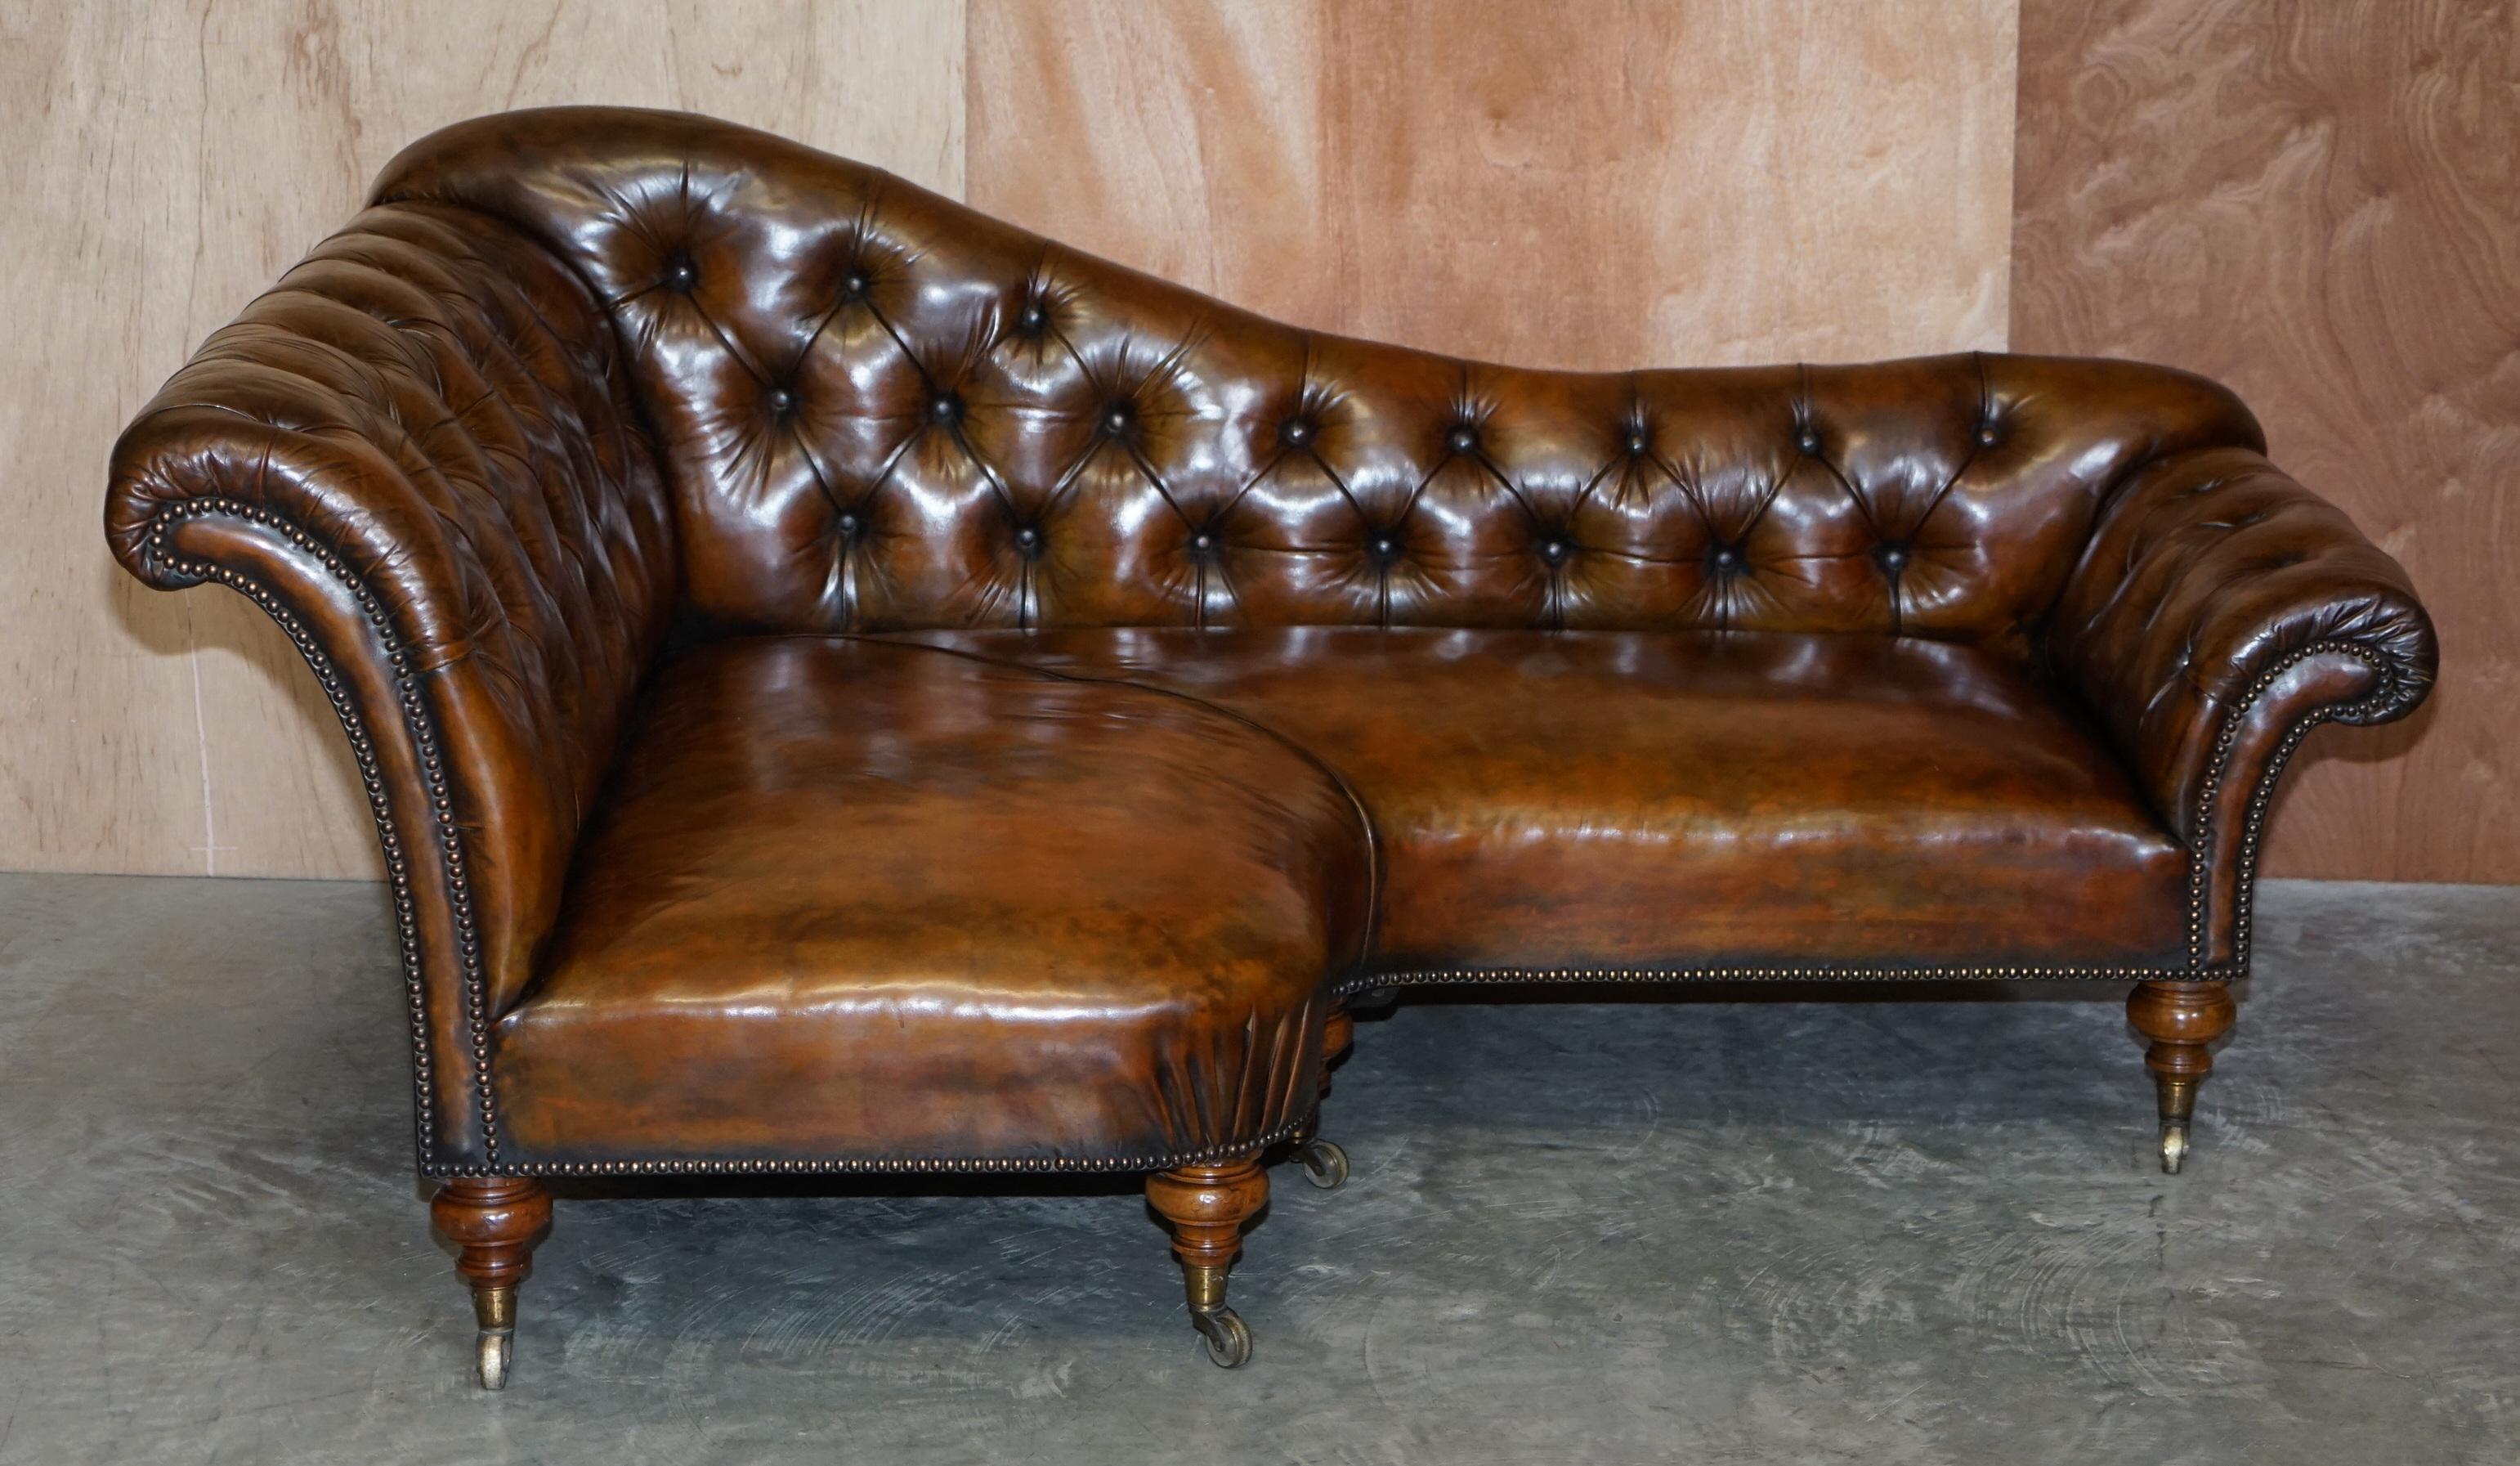 We are delighted to offer for sale this very rare highly collectable Victorian circa 1870-1880 Howard & Son’s Berners Street, Walnut framed corner sofa chaise lounge with Chesterfield tufting 

If you are in the market for a custom-made corner